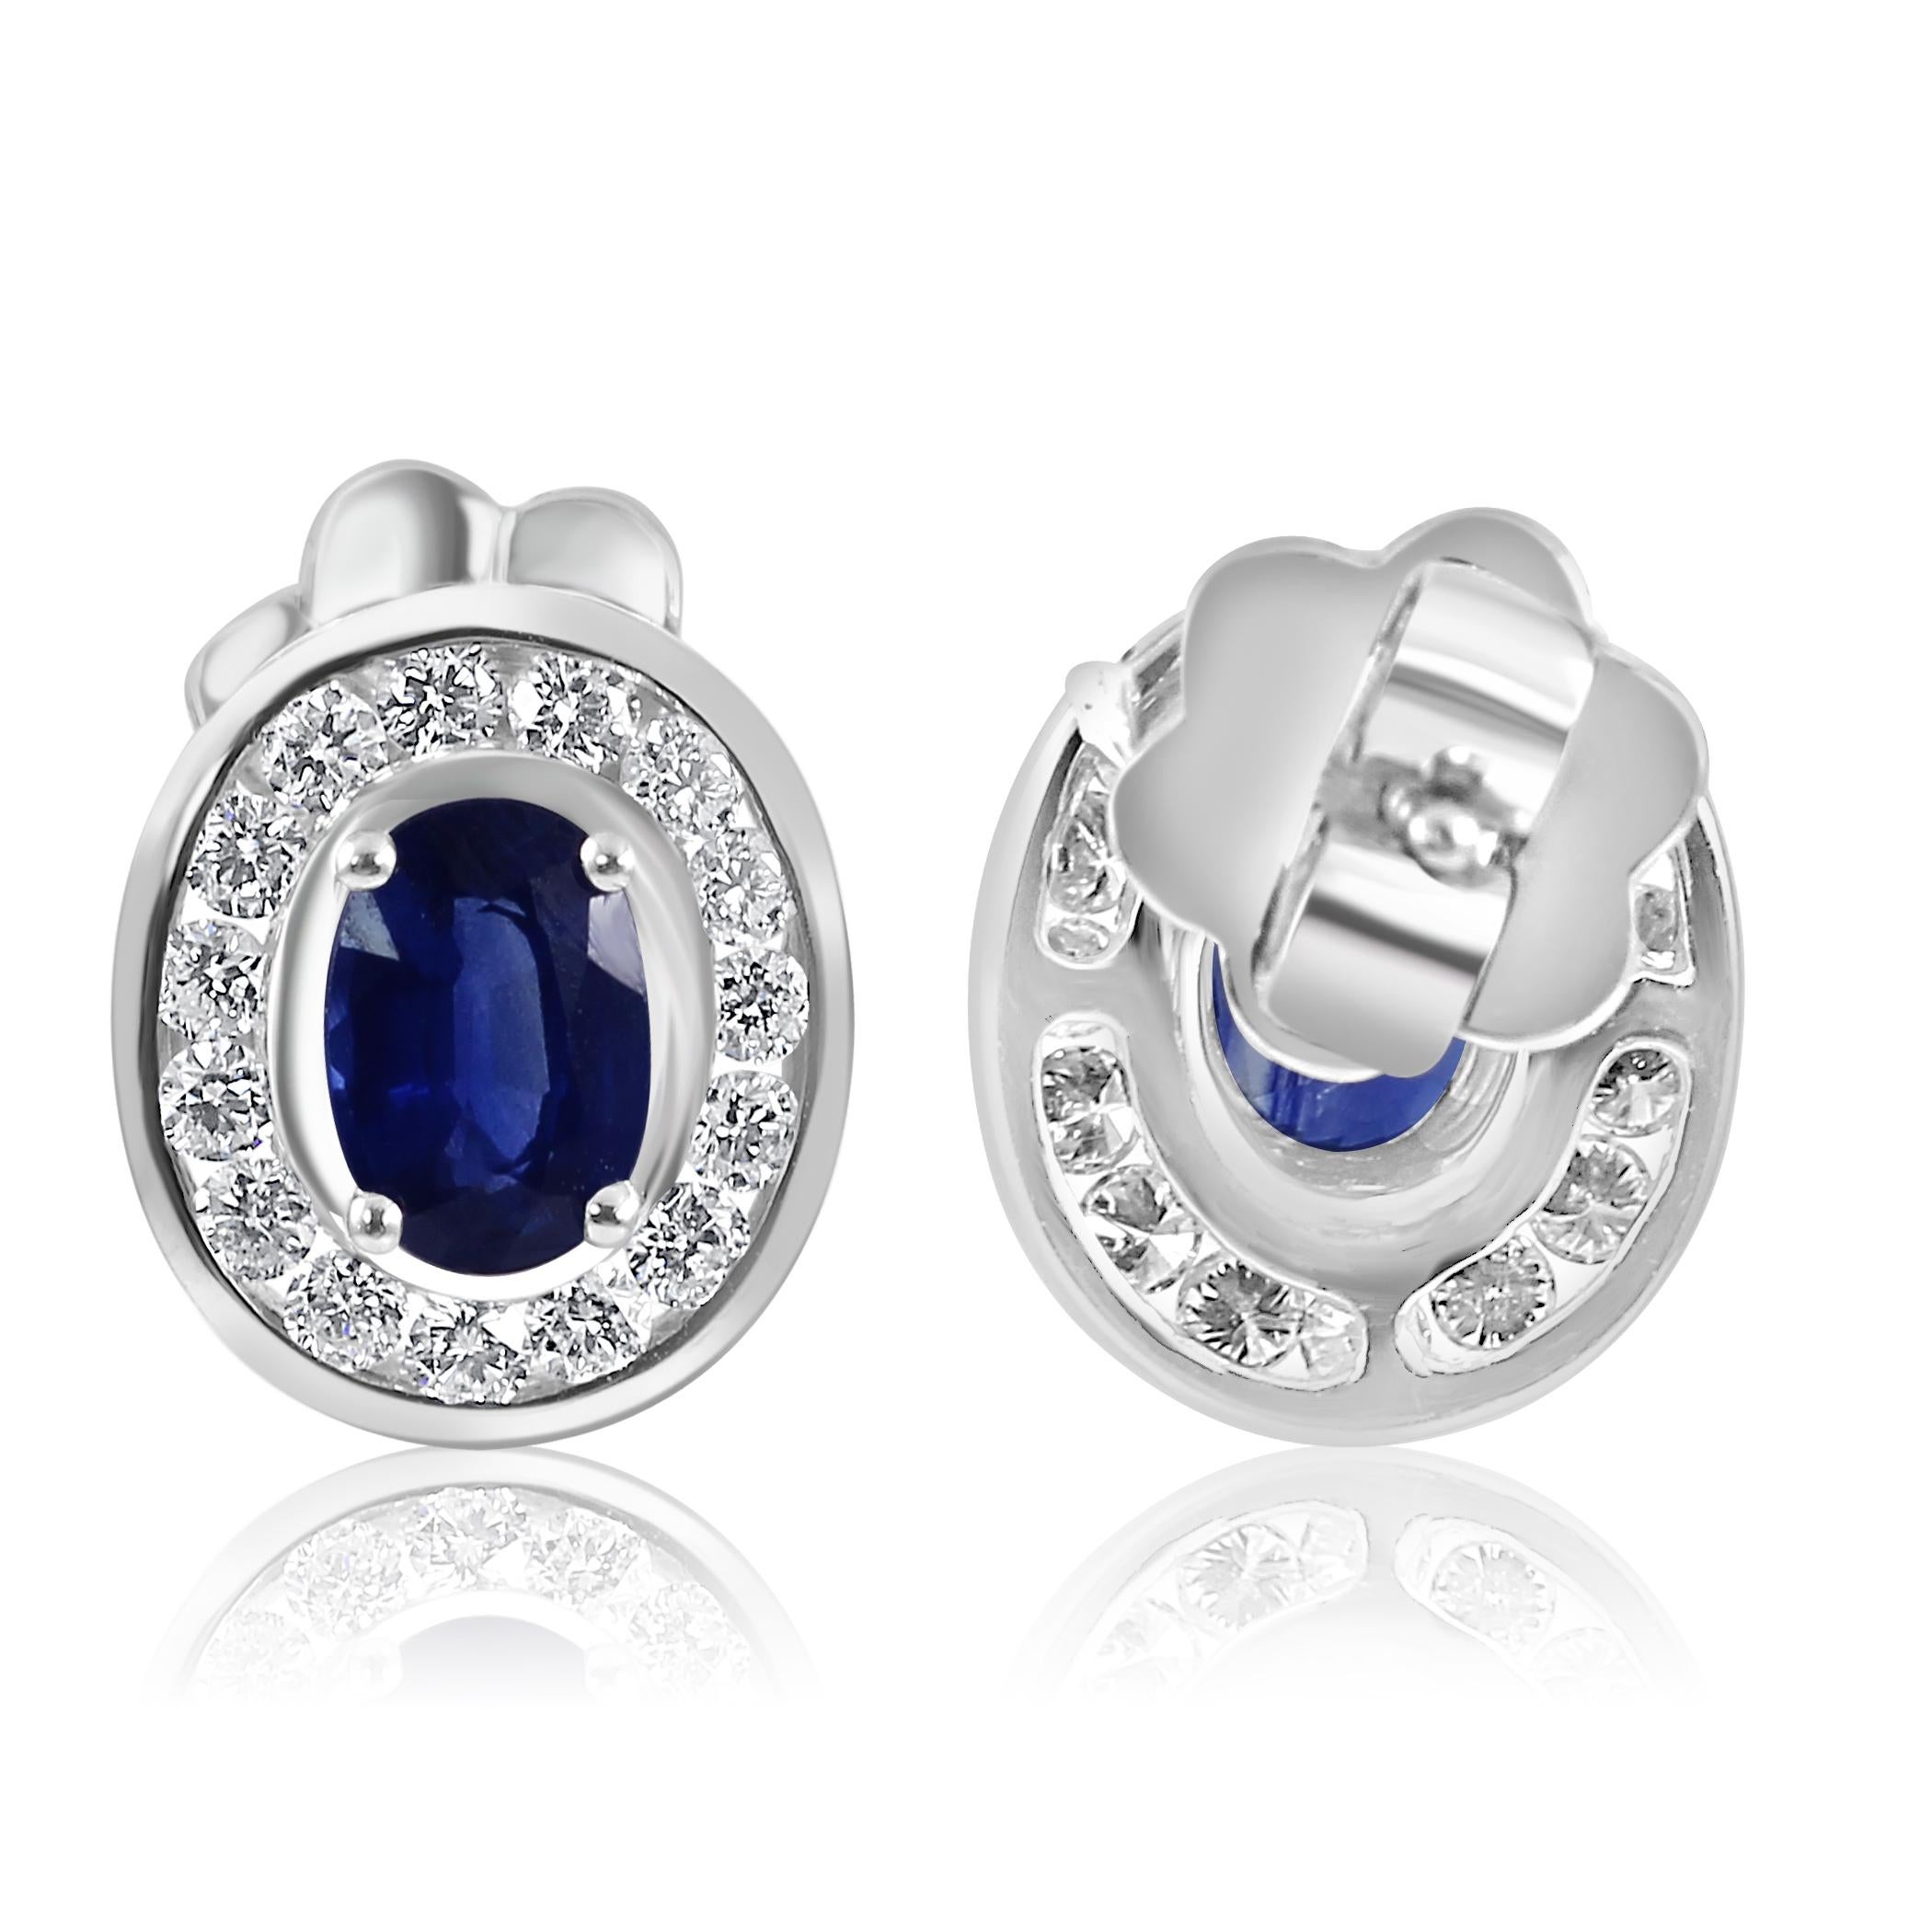 This exquisite pair of earrings redefines luxury, combining the timeless allure of blue sapphires with the brilliance of white diamonds in a design that exudes opulence and grace.

The focal point of each earring is the captivating blue sapphire